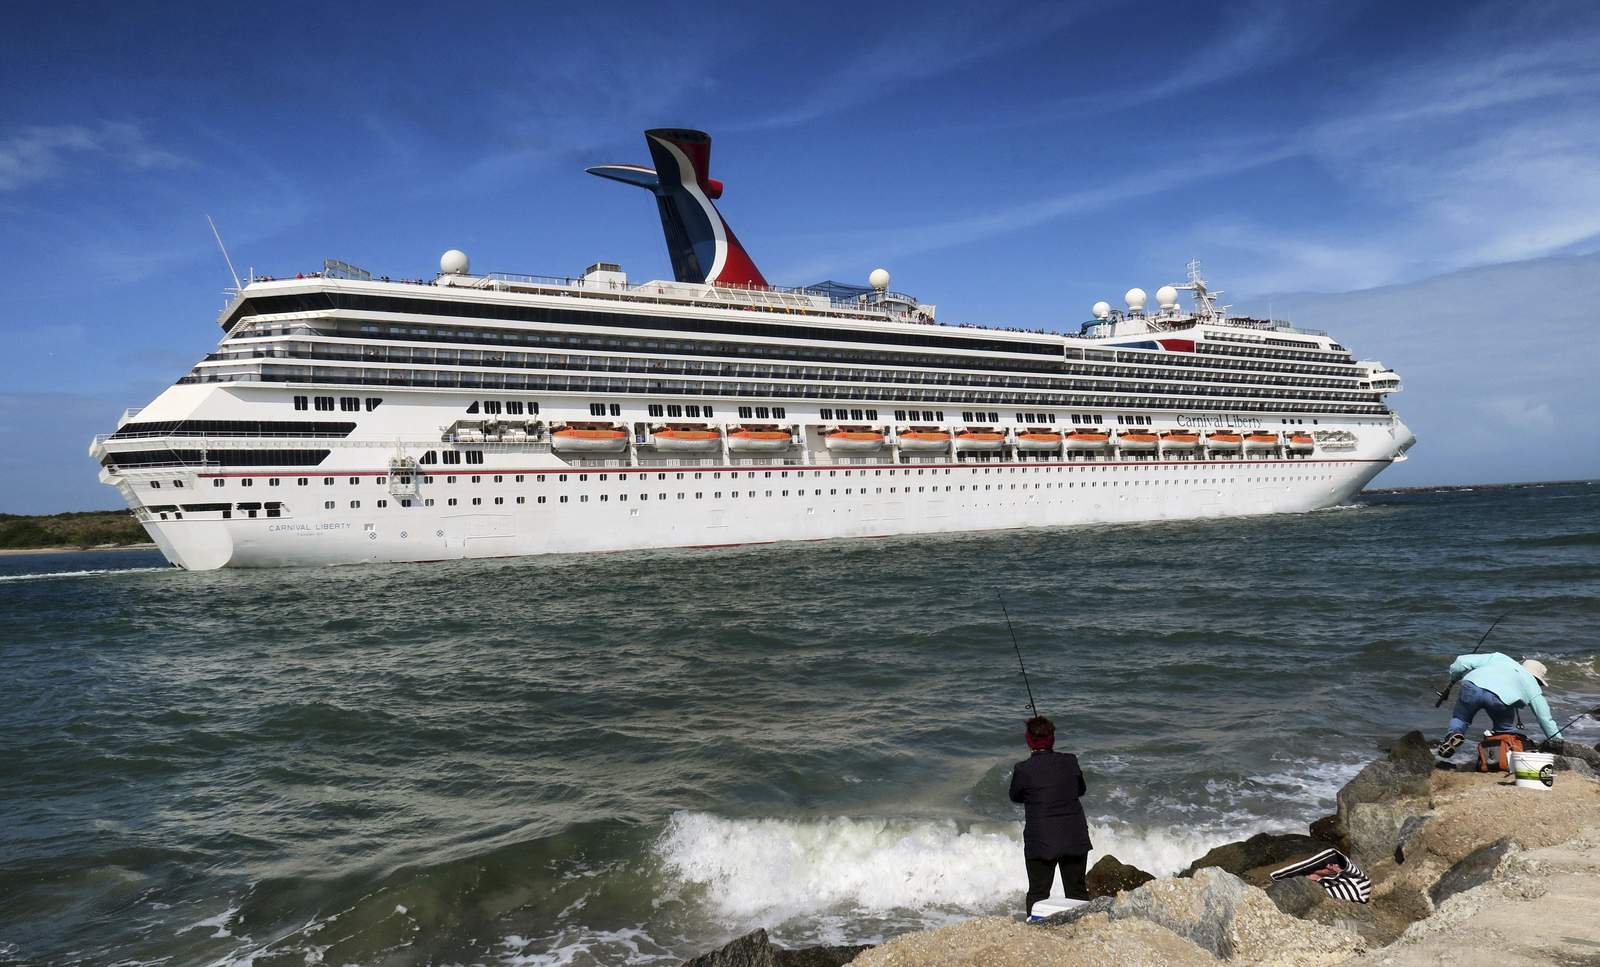 Carnival announces layoffs and furloughs as cruise industry works to stay afloat